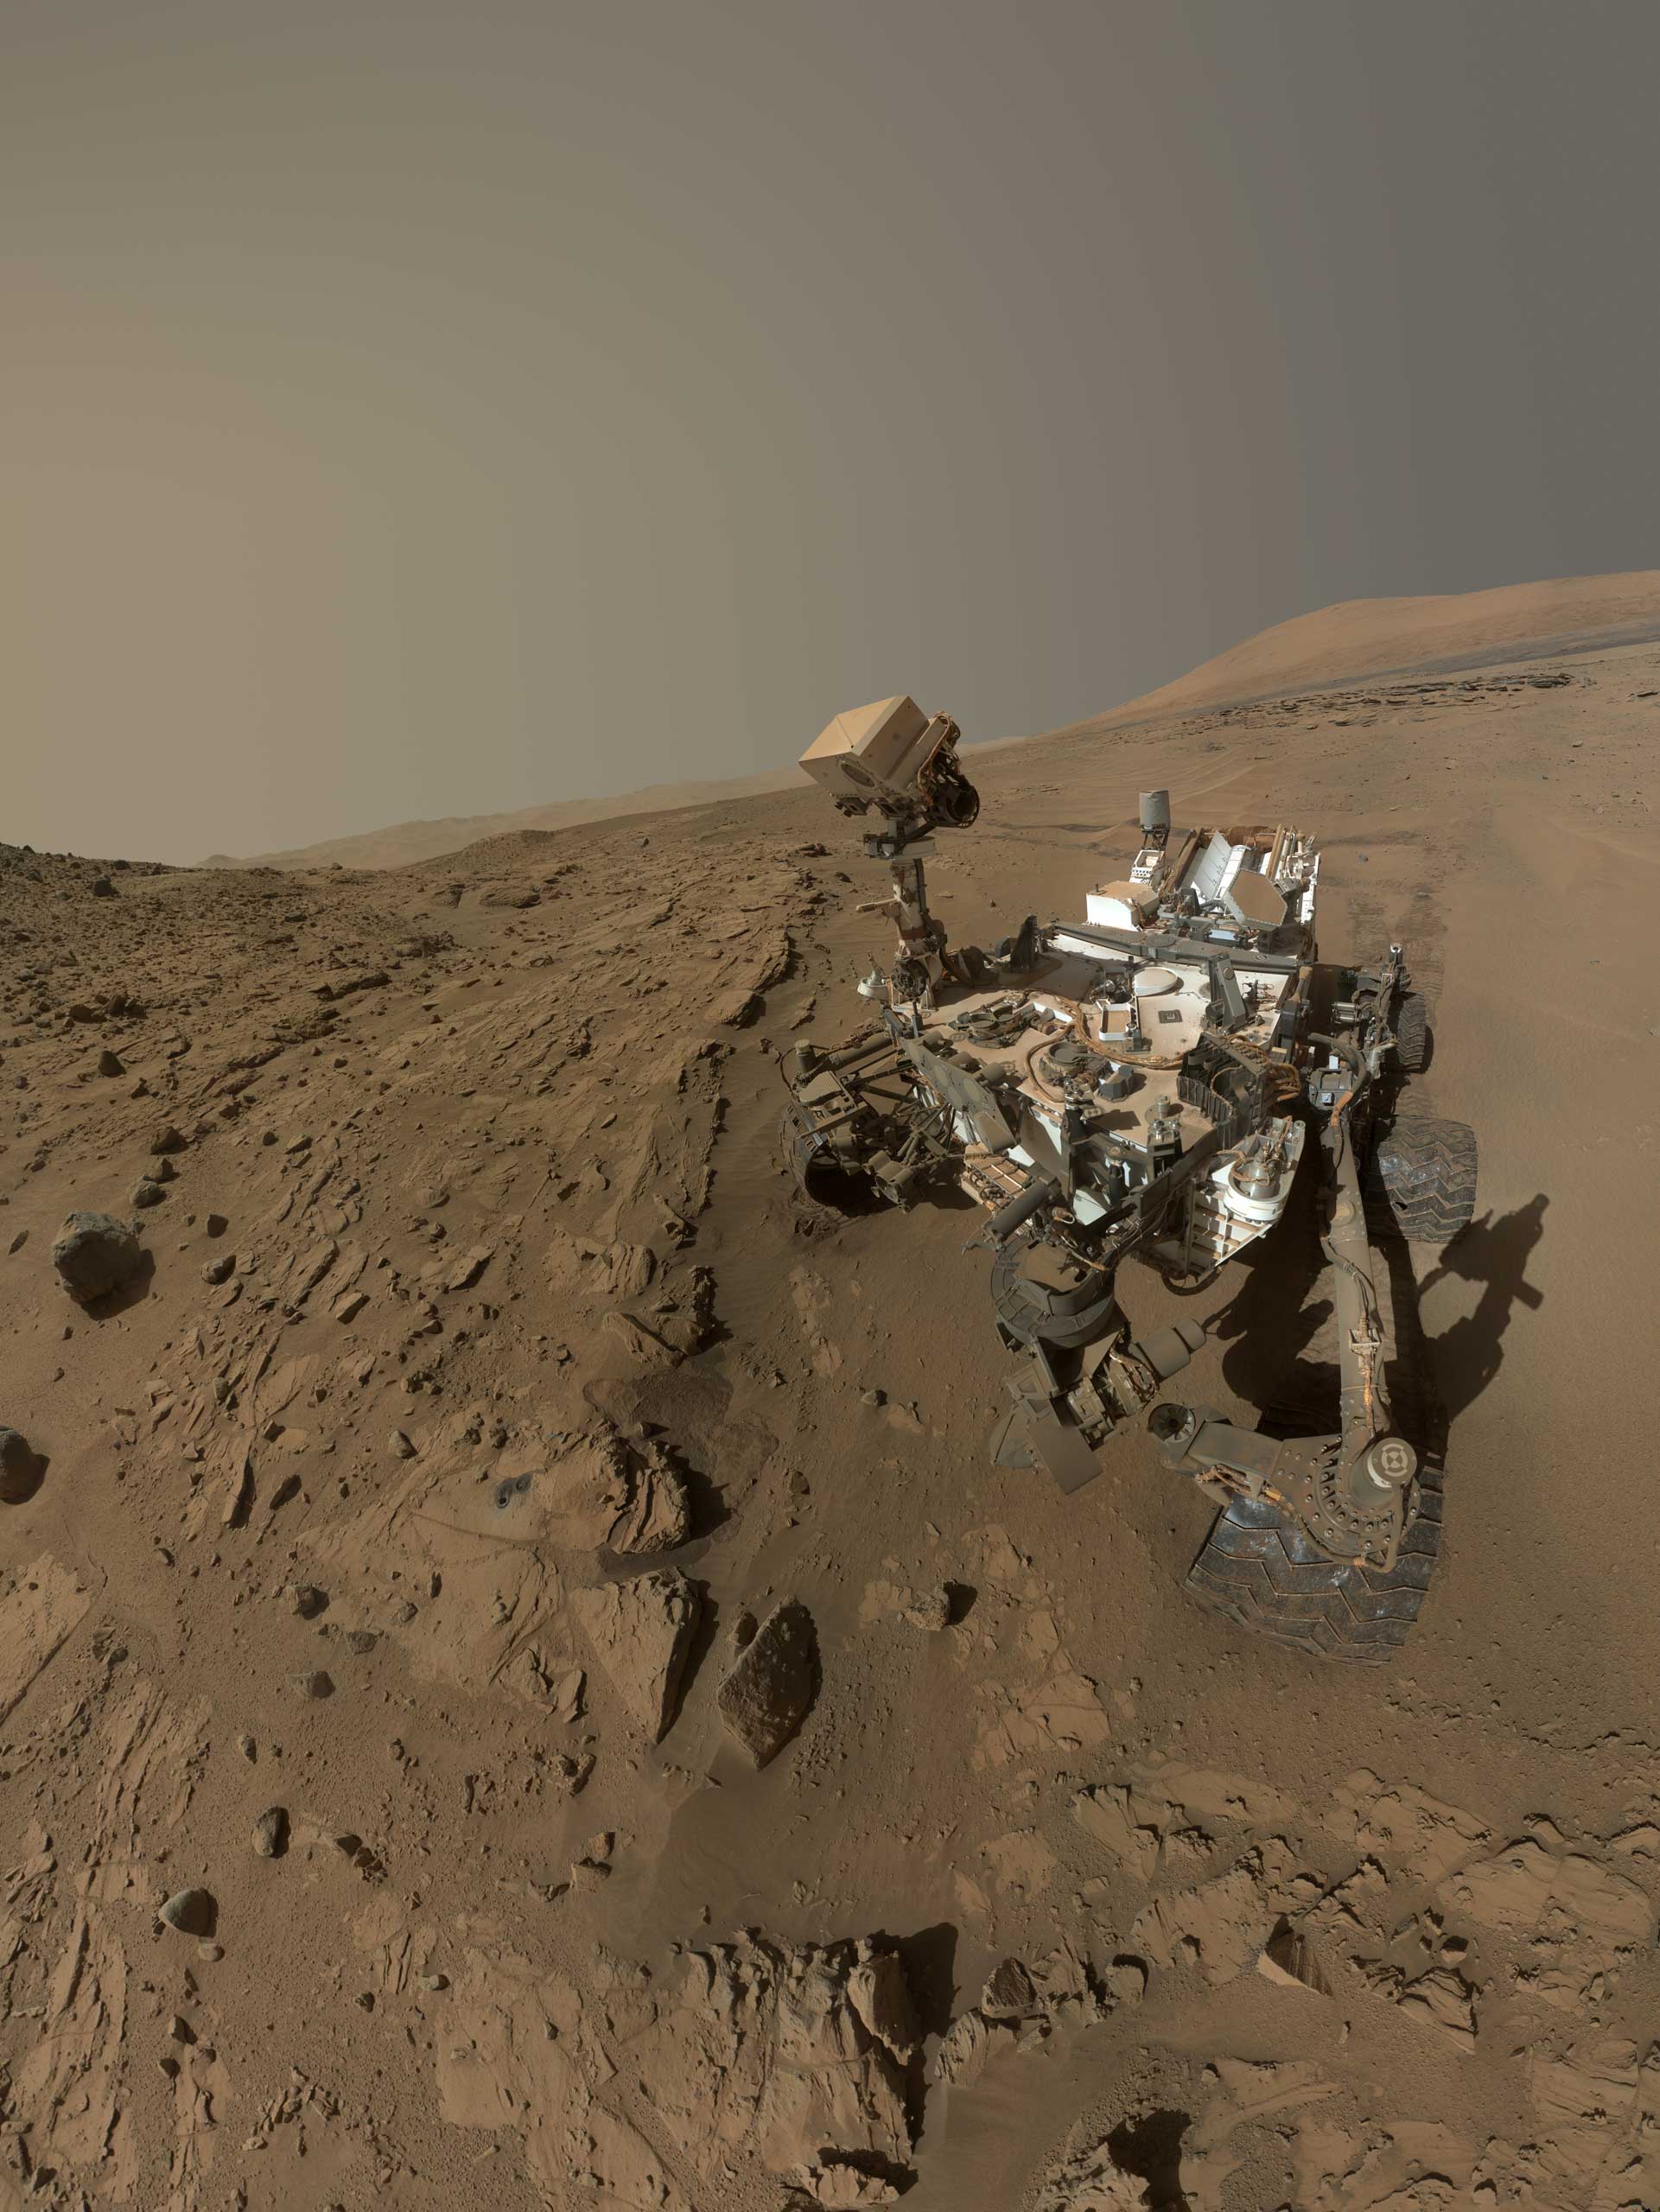 NASA's Curiosity Mars rover used the camera at the end of its arm in April and May 2014 to take dozens of component images combined into this self-portrait where the rover drilled into a sandstone target called "Windjana." The camera is the Mars Hand Lens Imager (MAHLI), which previously recorded portraits of Curiosity at two other important sites during the mission: "Rock Nest" (http://photojournal.jpl.nasa.gov/catalog/PIA16468) and "John Klein" (http://photojournal.jpl.nasa.gov/catalog/PIA16937).Winjana is within a science waypoint site called "The Kimberley," where sandstone layers with different degrees of resistance to wind erosion are exposed close together.The view does not include the rover's arm. It does include the hole in Windjana produced by the hammering drill on Curiosity's arm collecting a sample of rock powder from the interior of the rock. The hole is surrounded by grayish cuttings on top of the rock ledge to the left of the rover. The Mast Camera (Mastcam) atop the rover's remote sensing mast is pointed at the drill hole. A Mastcam image of the drill hole from that perspective is at http://mars.jpl.nasa.gov/msl/multimedia/raw/?rawid=0626MR0026780000401608E01_DXXX&amp;s=626. The hole is 0.63 inch (1.6 centimeters) in diameter. The rover's wheels are 20 inches (0.5 meter) in diameter.Most of the component frames of this mosaic view were taken during the 613th Martian day, or sol, of Curiosity's work on Mars (April 27, 2014). Frames showing Windjana after completion of the drilling were taken on Sol 627 (May 12, 2014). The hole was drilled on Sol 621 (May 5, 2014).MAHLI was built by Malin Space Science Systems, San Diego. NASA's Jet Propulsion Laboratory, a division of the California Institute of Technology in Pasadena, manages the Mars Science Laboratory Project for the NASA Science Mission Directorate, Washington. JPL designed and built the project's Curiosity rover.&gt; NASA’s Mars Curiosity Rover Marks First Martian Year with Mission Suc